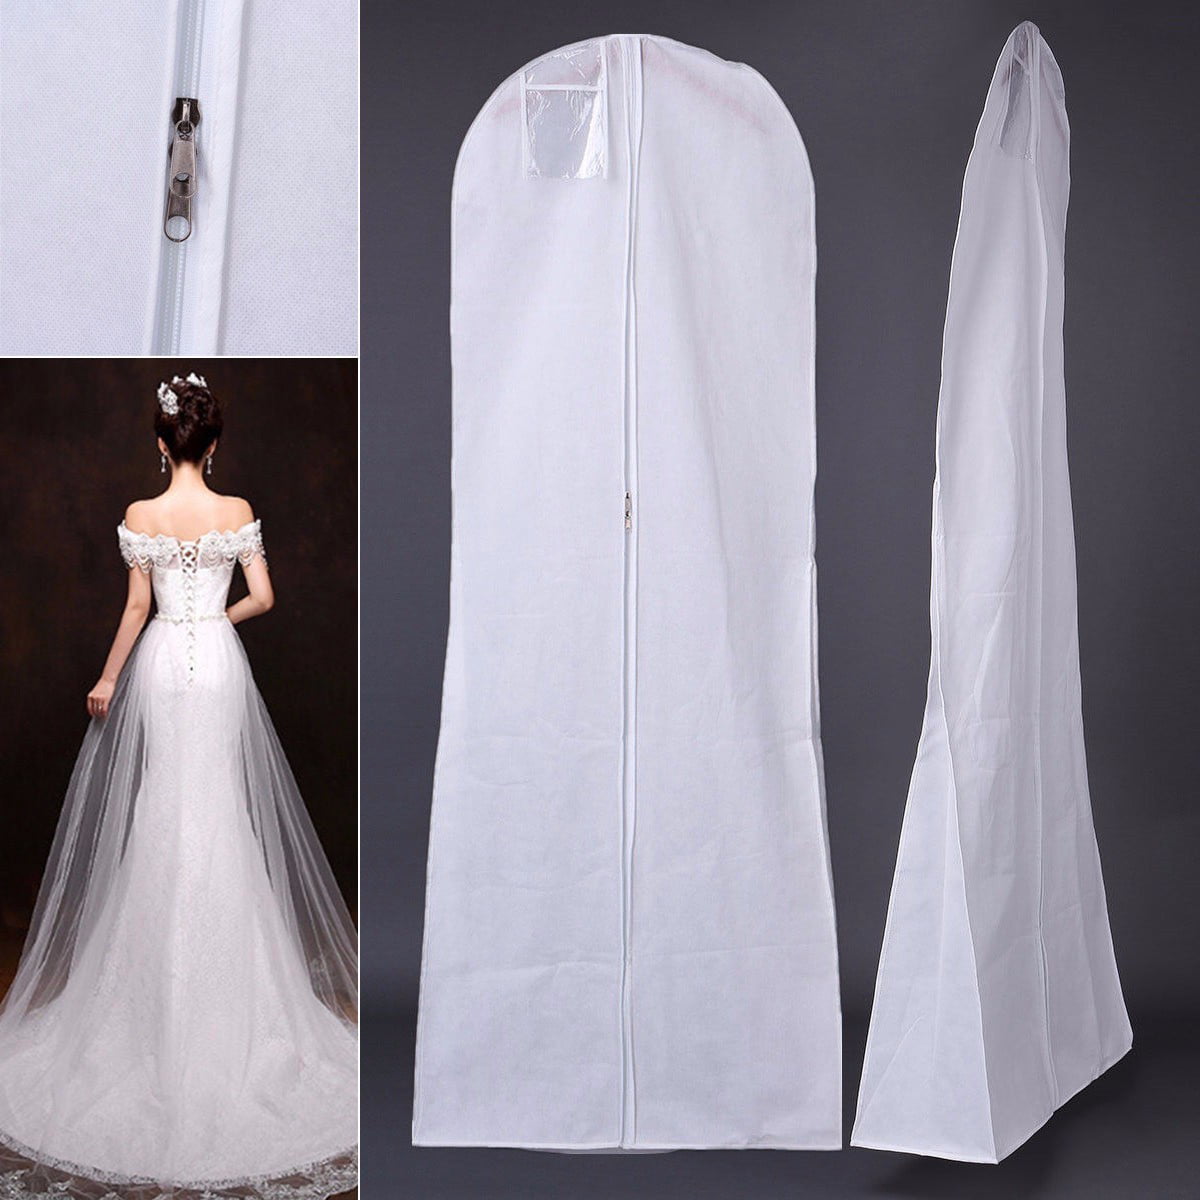 1* Dust-Proof Cover Bridal Gown Wedding Dress Storage Bag Breathable For Garment 